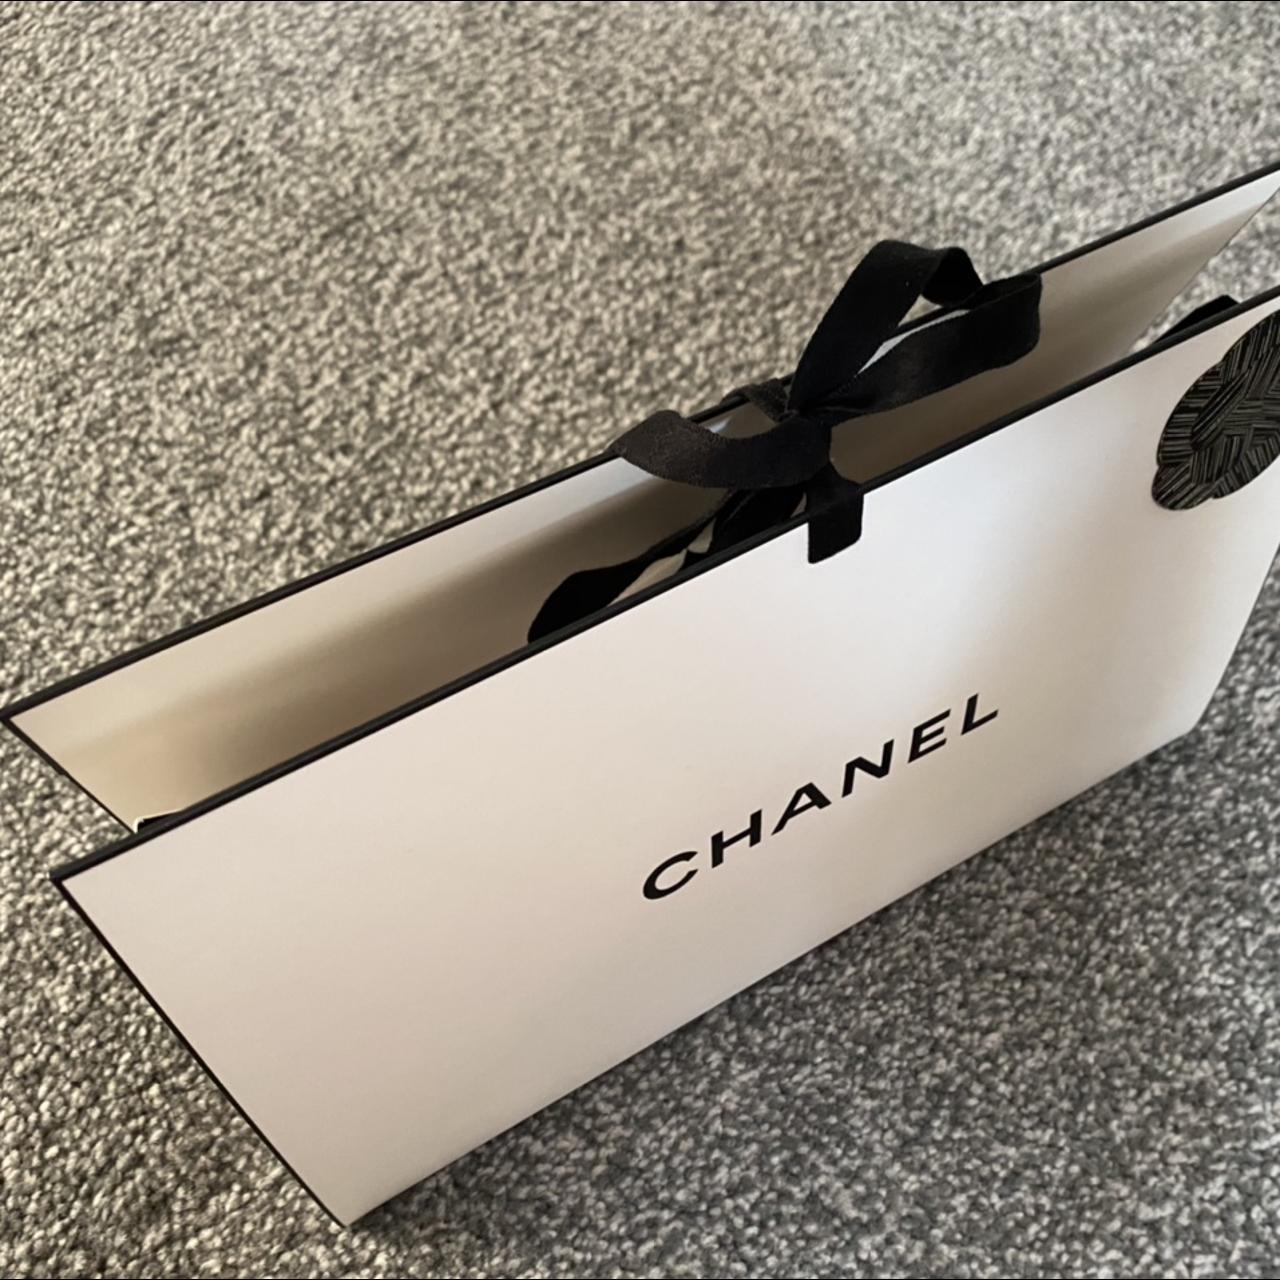 authentic chanel white paper bag with one of the - Depop